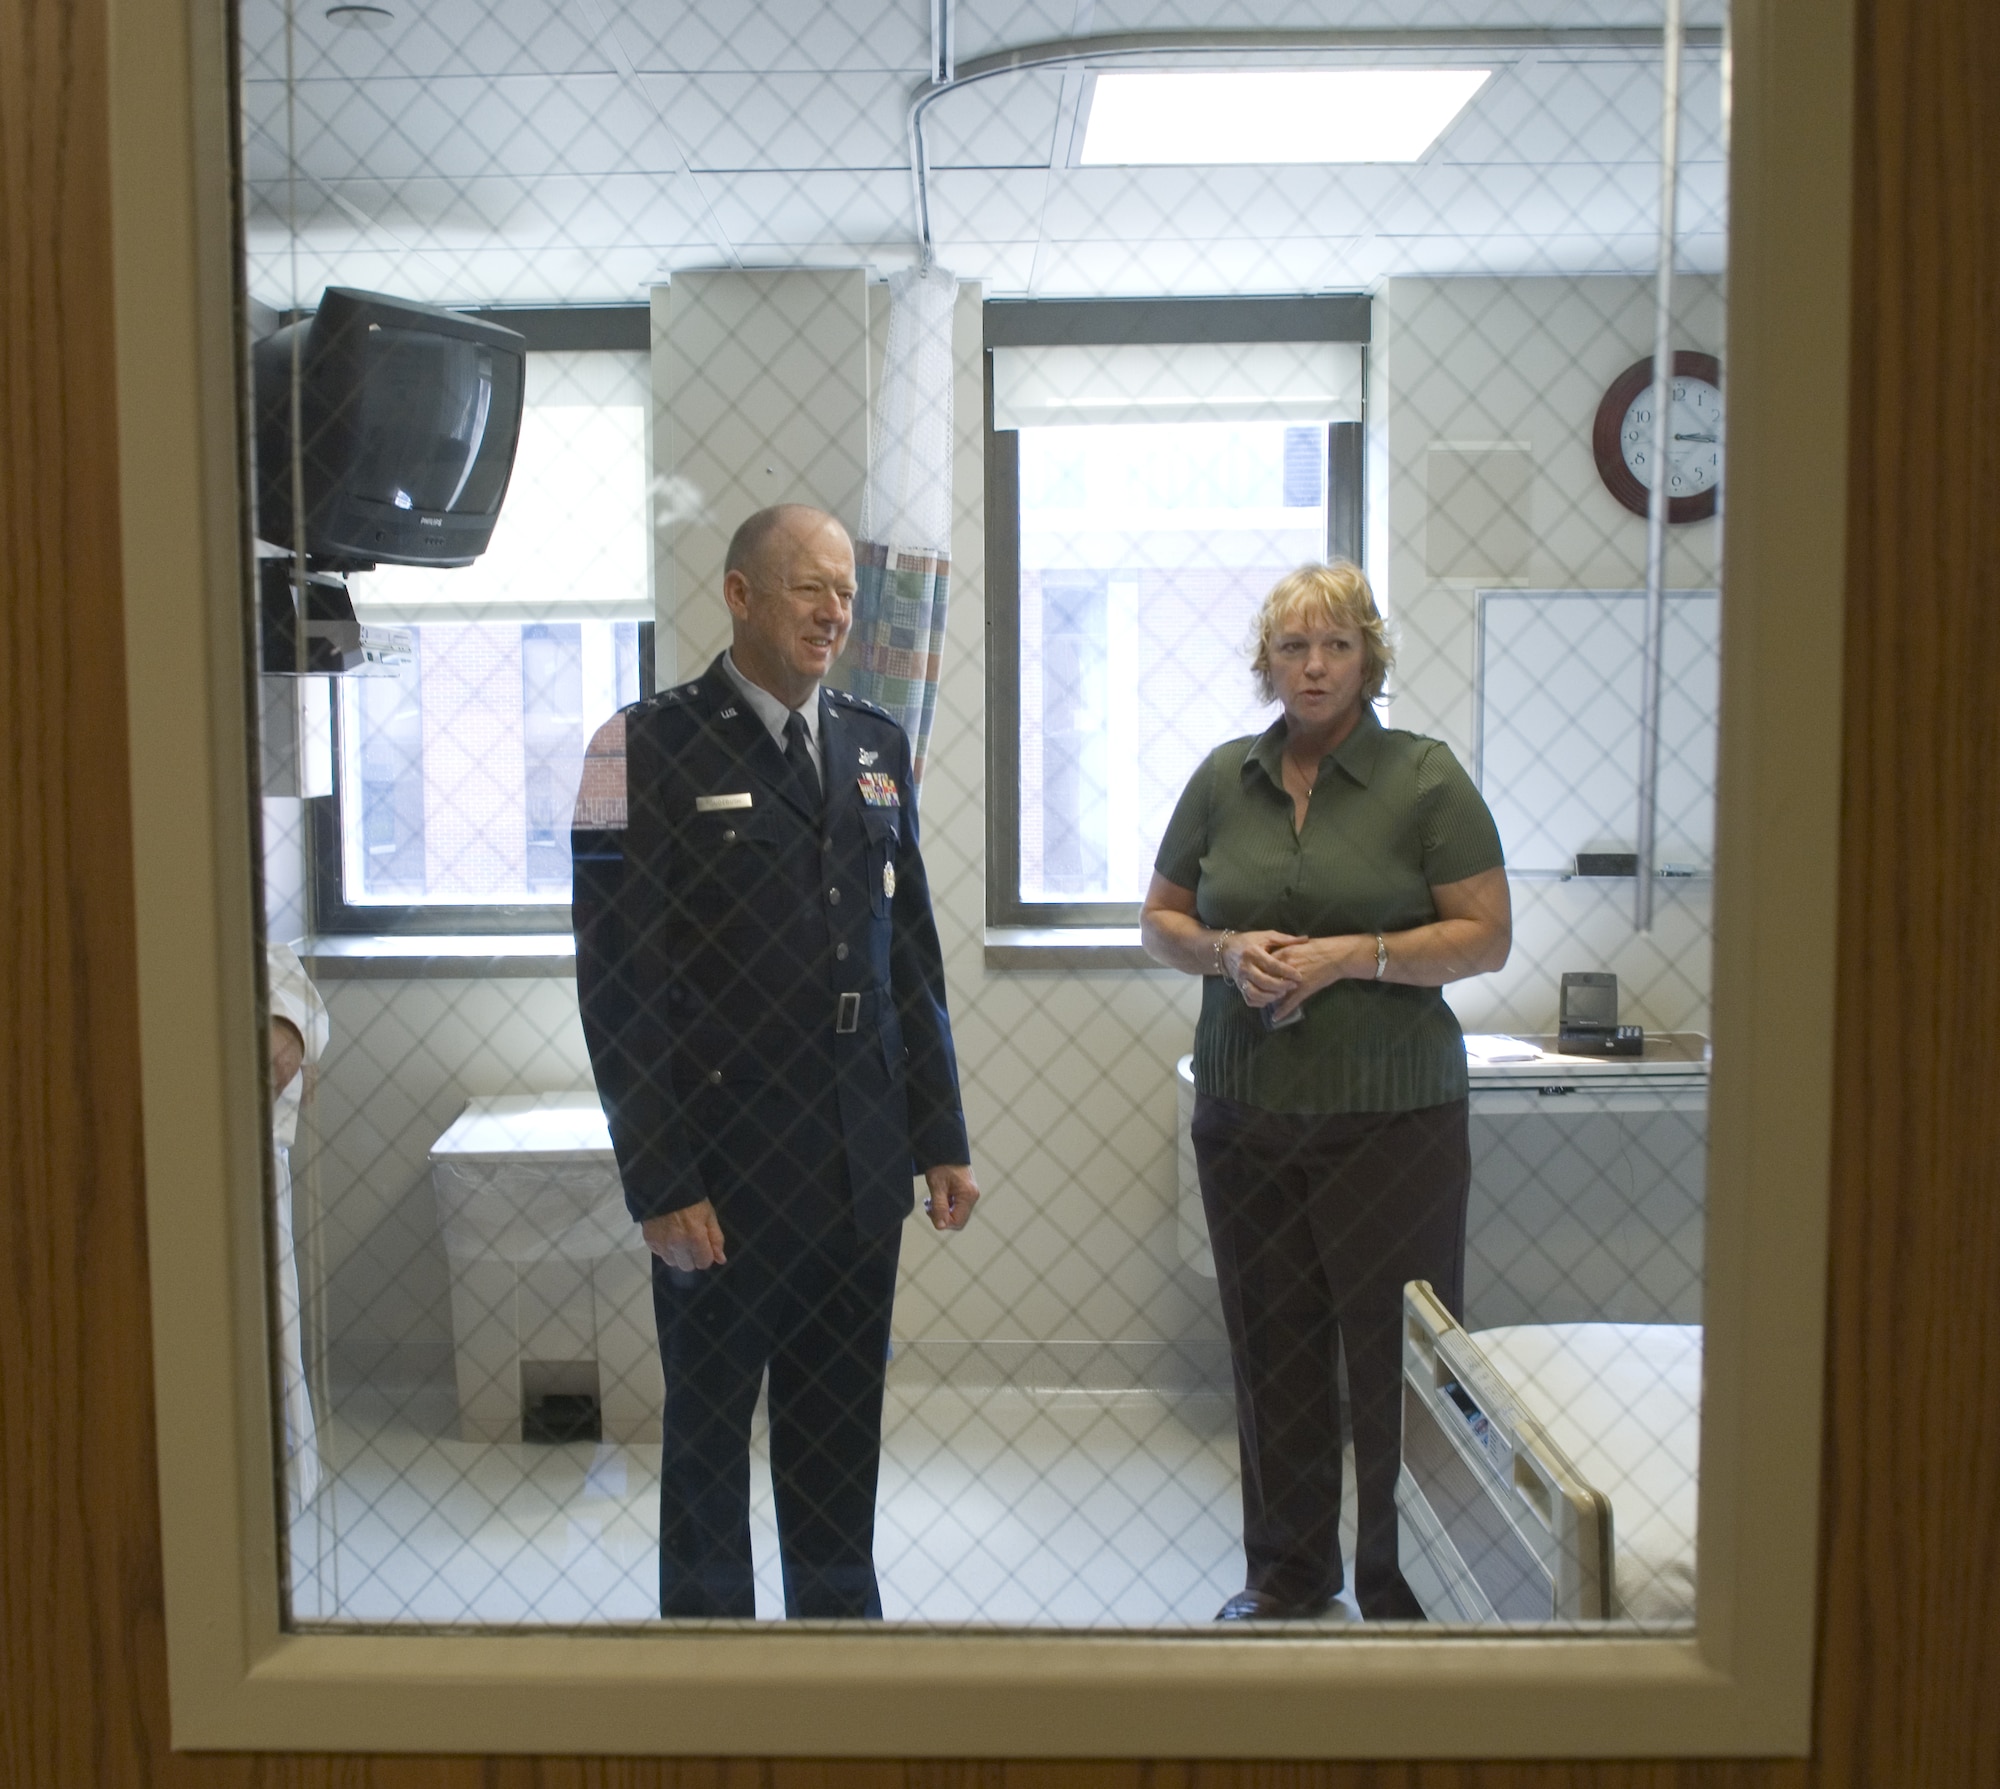 Kate Boulter  explains to Lt. Gen. (Dr.) James G. Roudebush the many unique features of a patient room in the only civilian biocontainment unit in the nation Aug. 13 in Omaha, Neb. This is a specialized 10-bed area in the University of Nebraska Medical Center College of Medicine. General Roudebush also toured the new Sorrell Center of his alma mater. The general is a native Nebraskan and the Air Force surgeon general. Ms. Boulter is a registered nurse at the hospital. (U.S. Air Force photo/Lance Cheung)